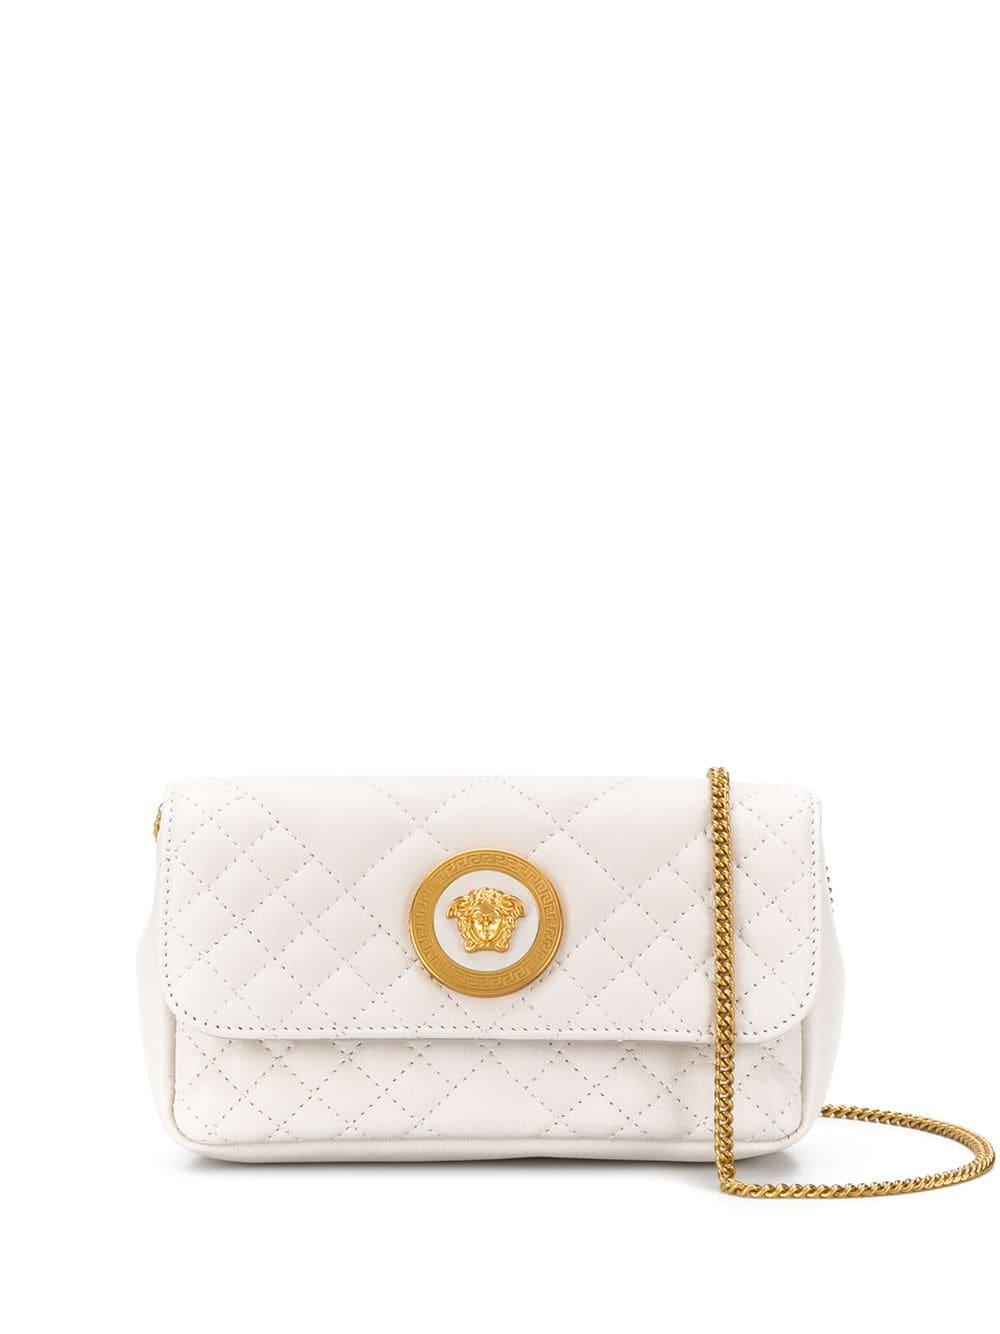 Versace Quilted Medusa Crossbody Bag in White | Lyst Canada